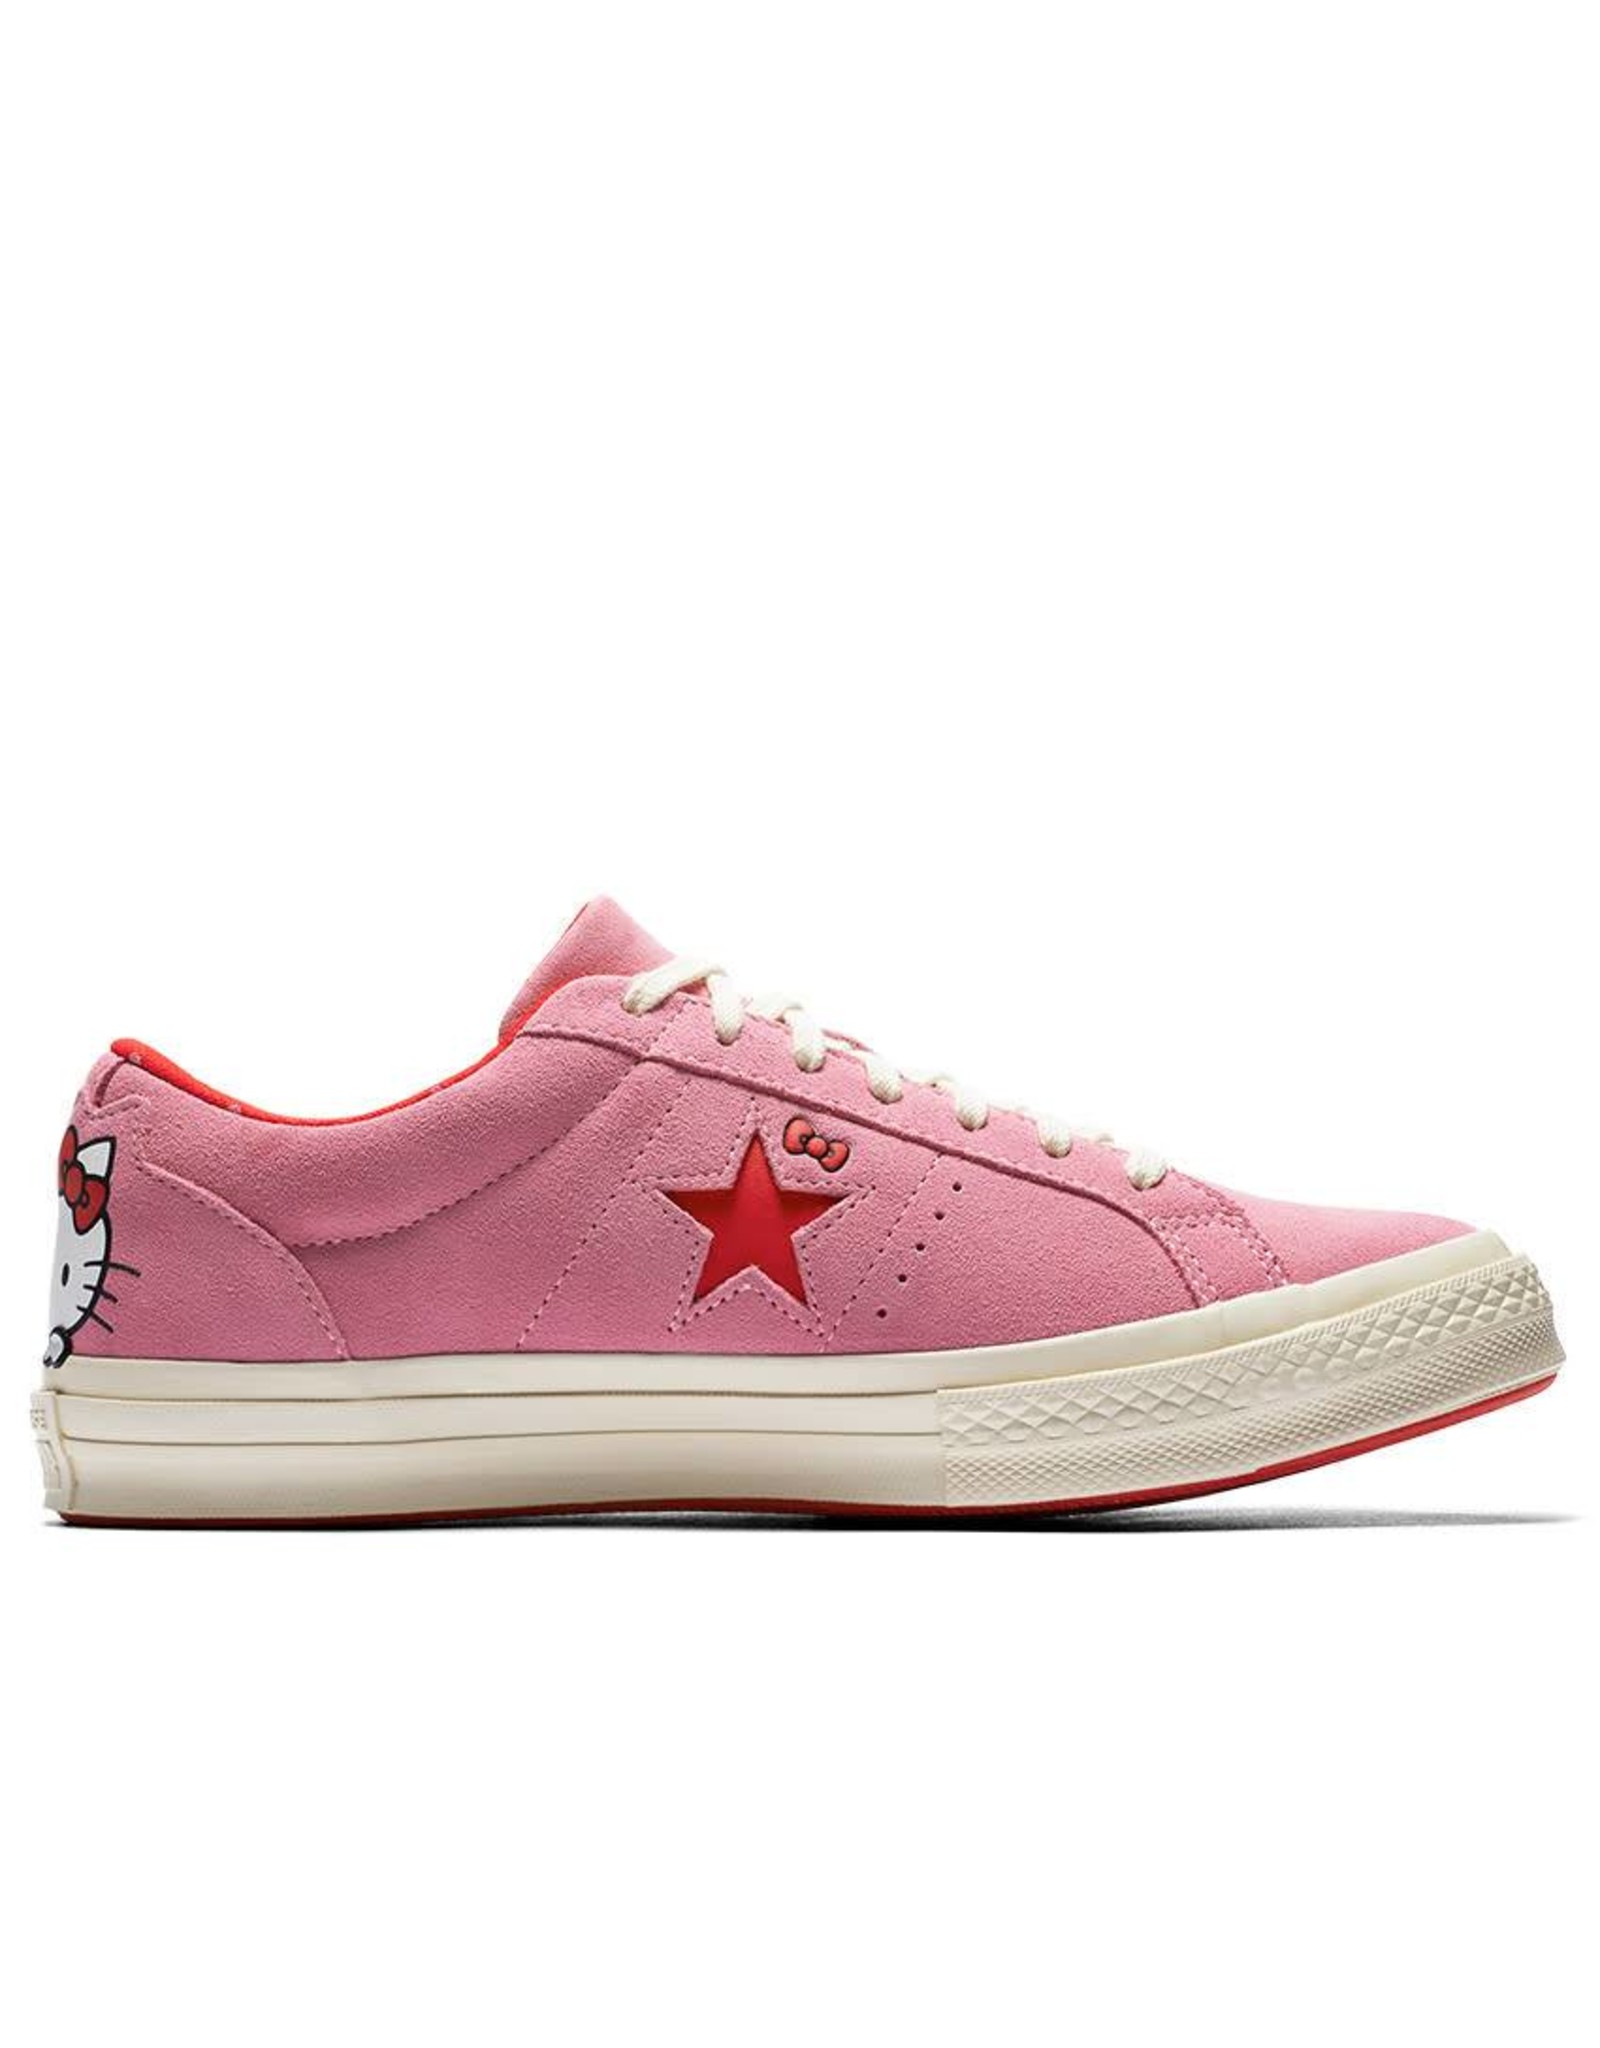 converse pink one star